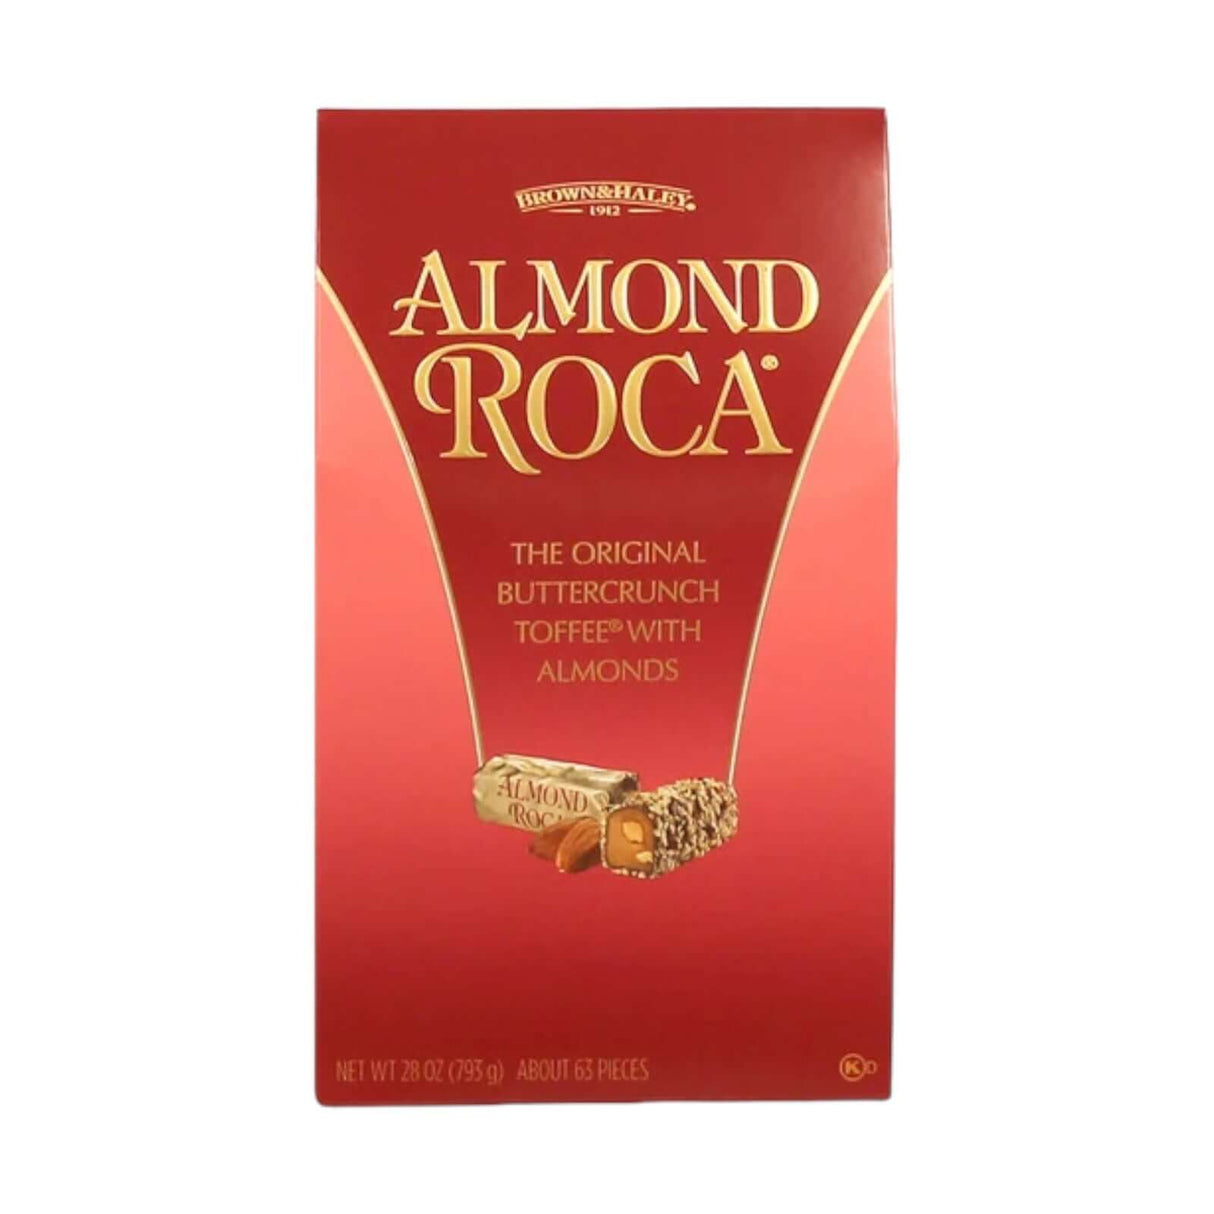 Brown & Haley Almond Roca The Original Buttercrunch Toffee with Almond